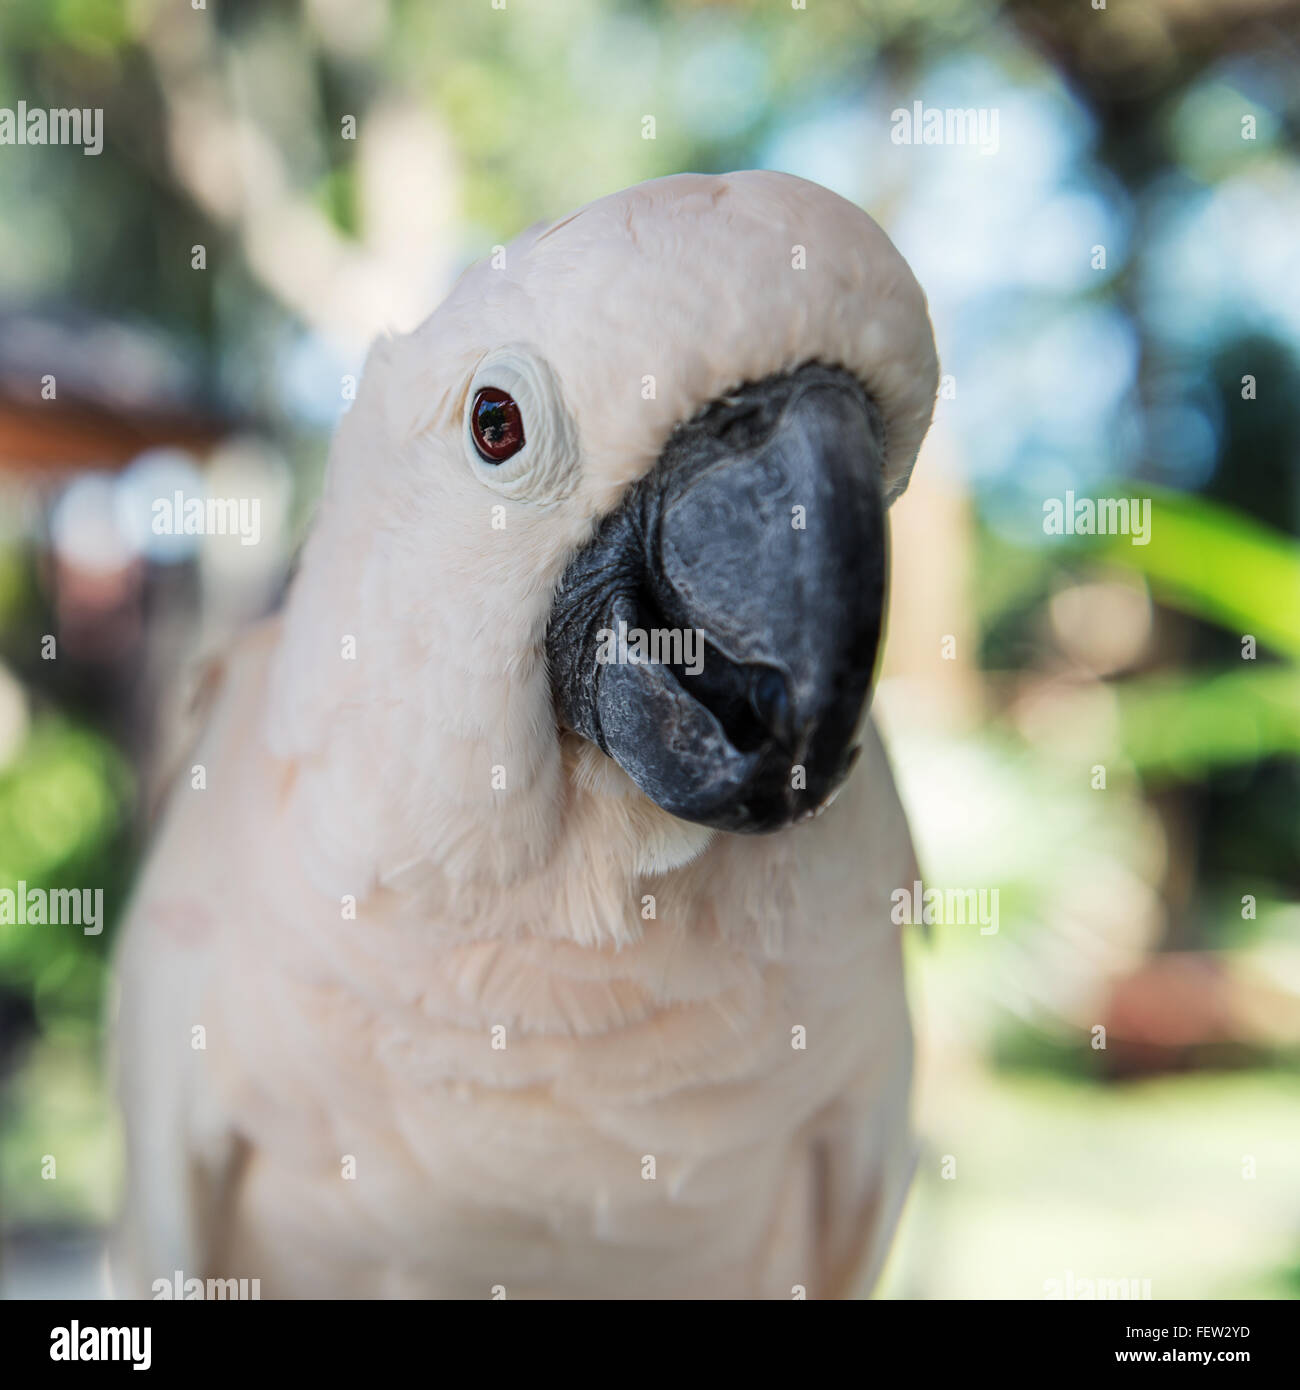 Close-up white parrot at Bali Birds Park. Indonesia Stock Photo